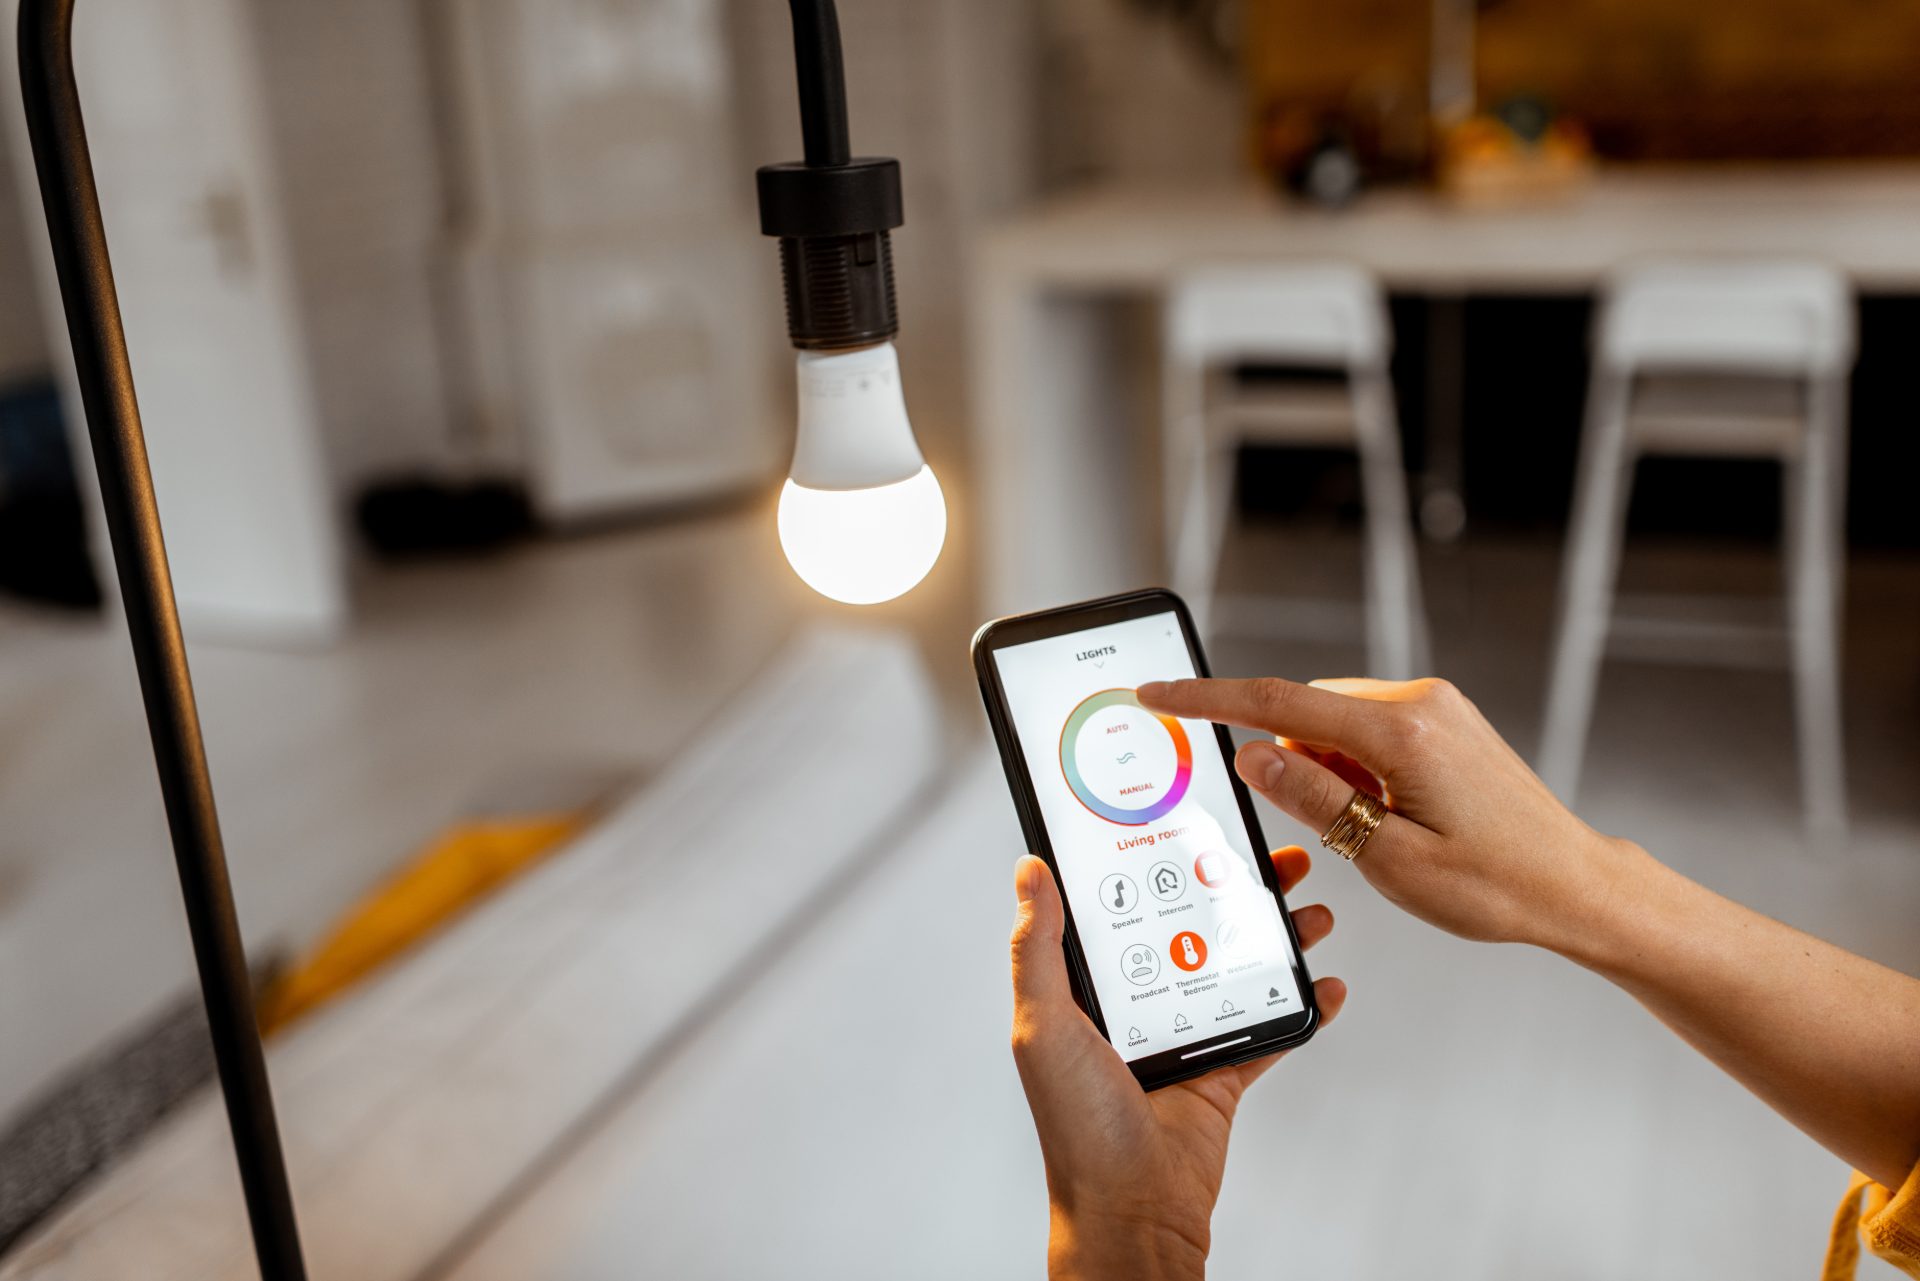 How To Connect Feit Smart Bulbs To Google Home